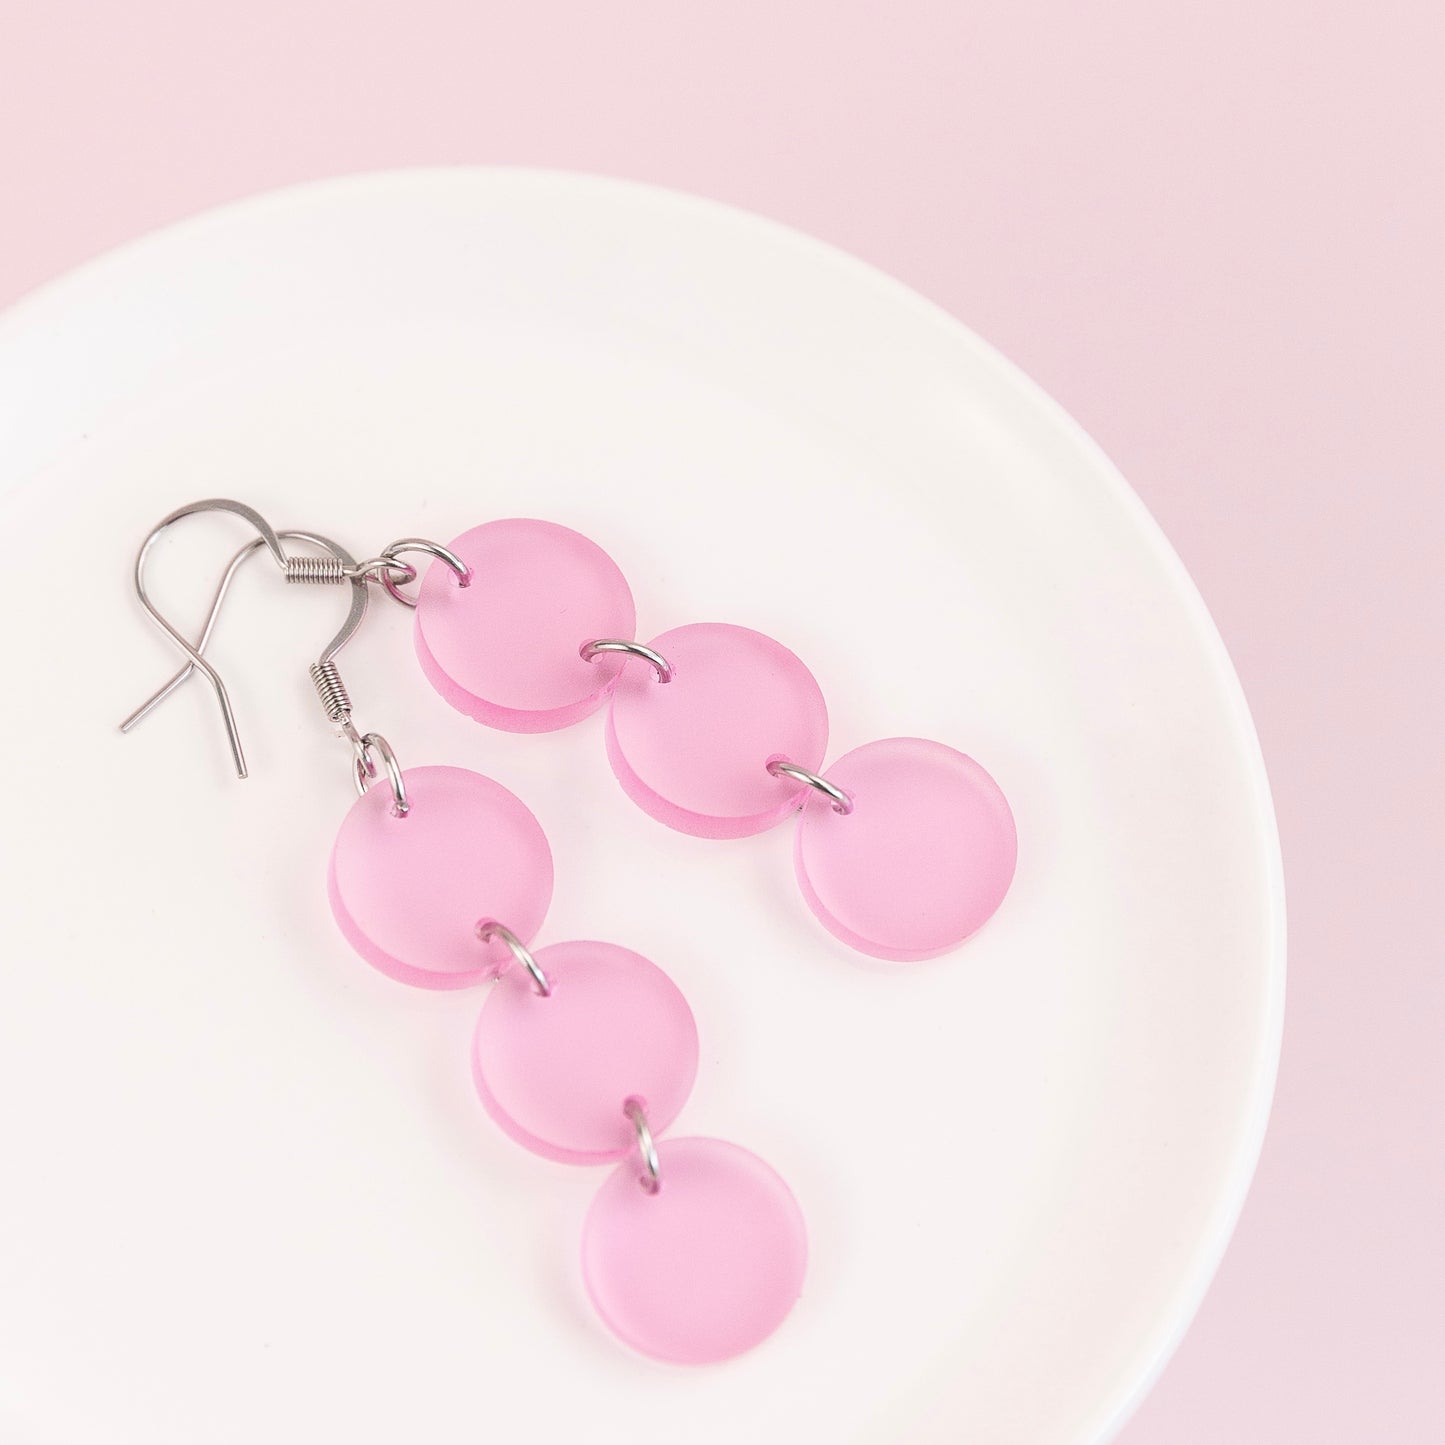 THE DOTTY TRIO in Sheer Pink Ice/ Lightweight Acrylic Statement Earrings